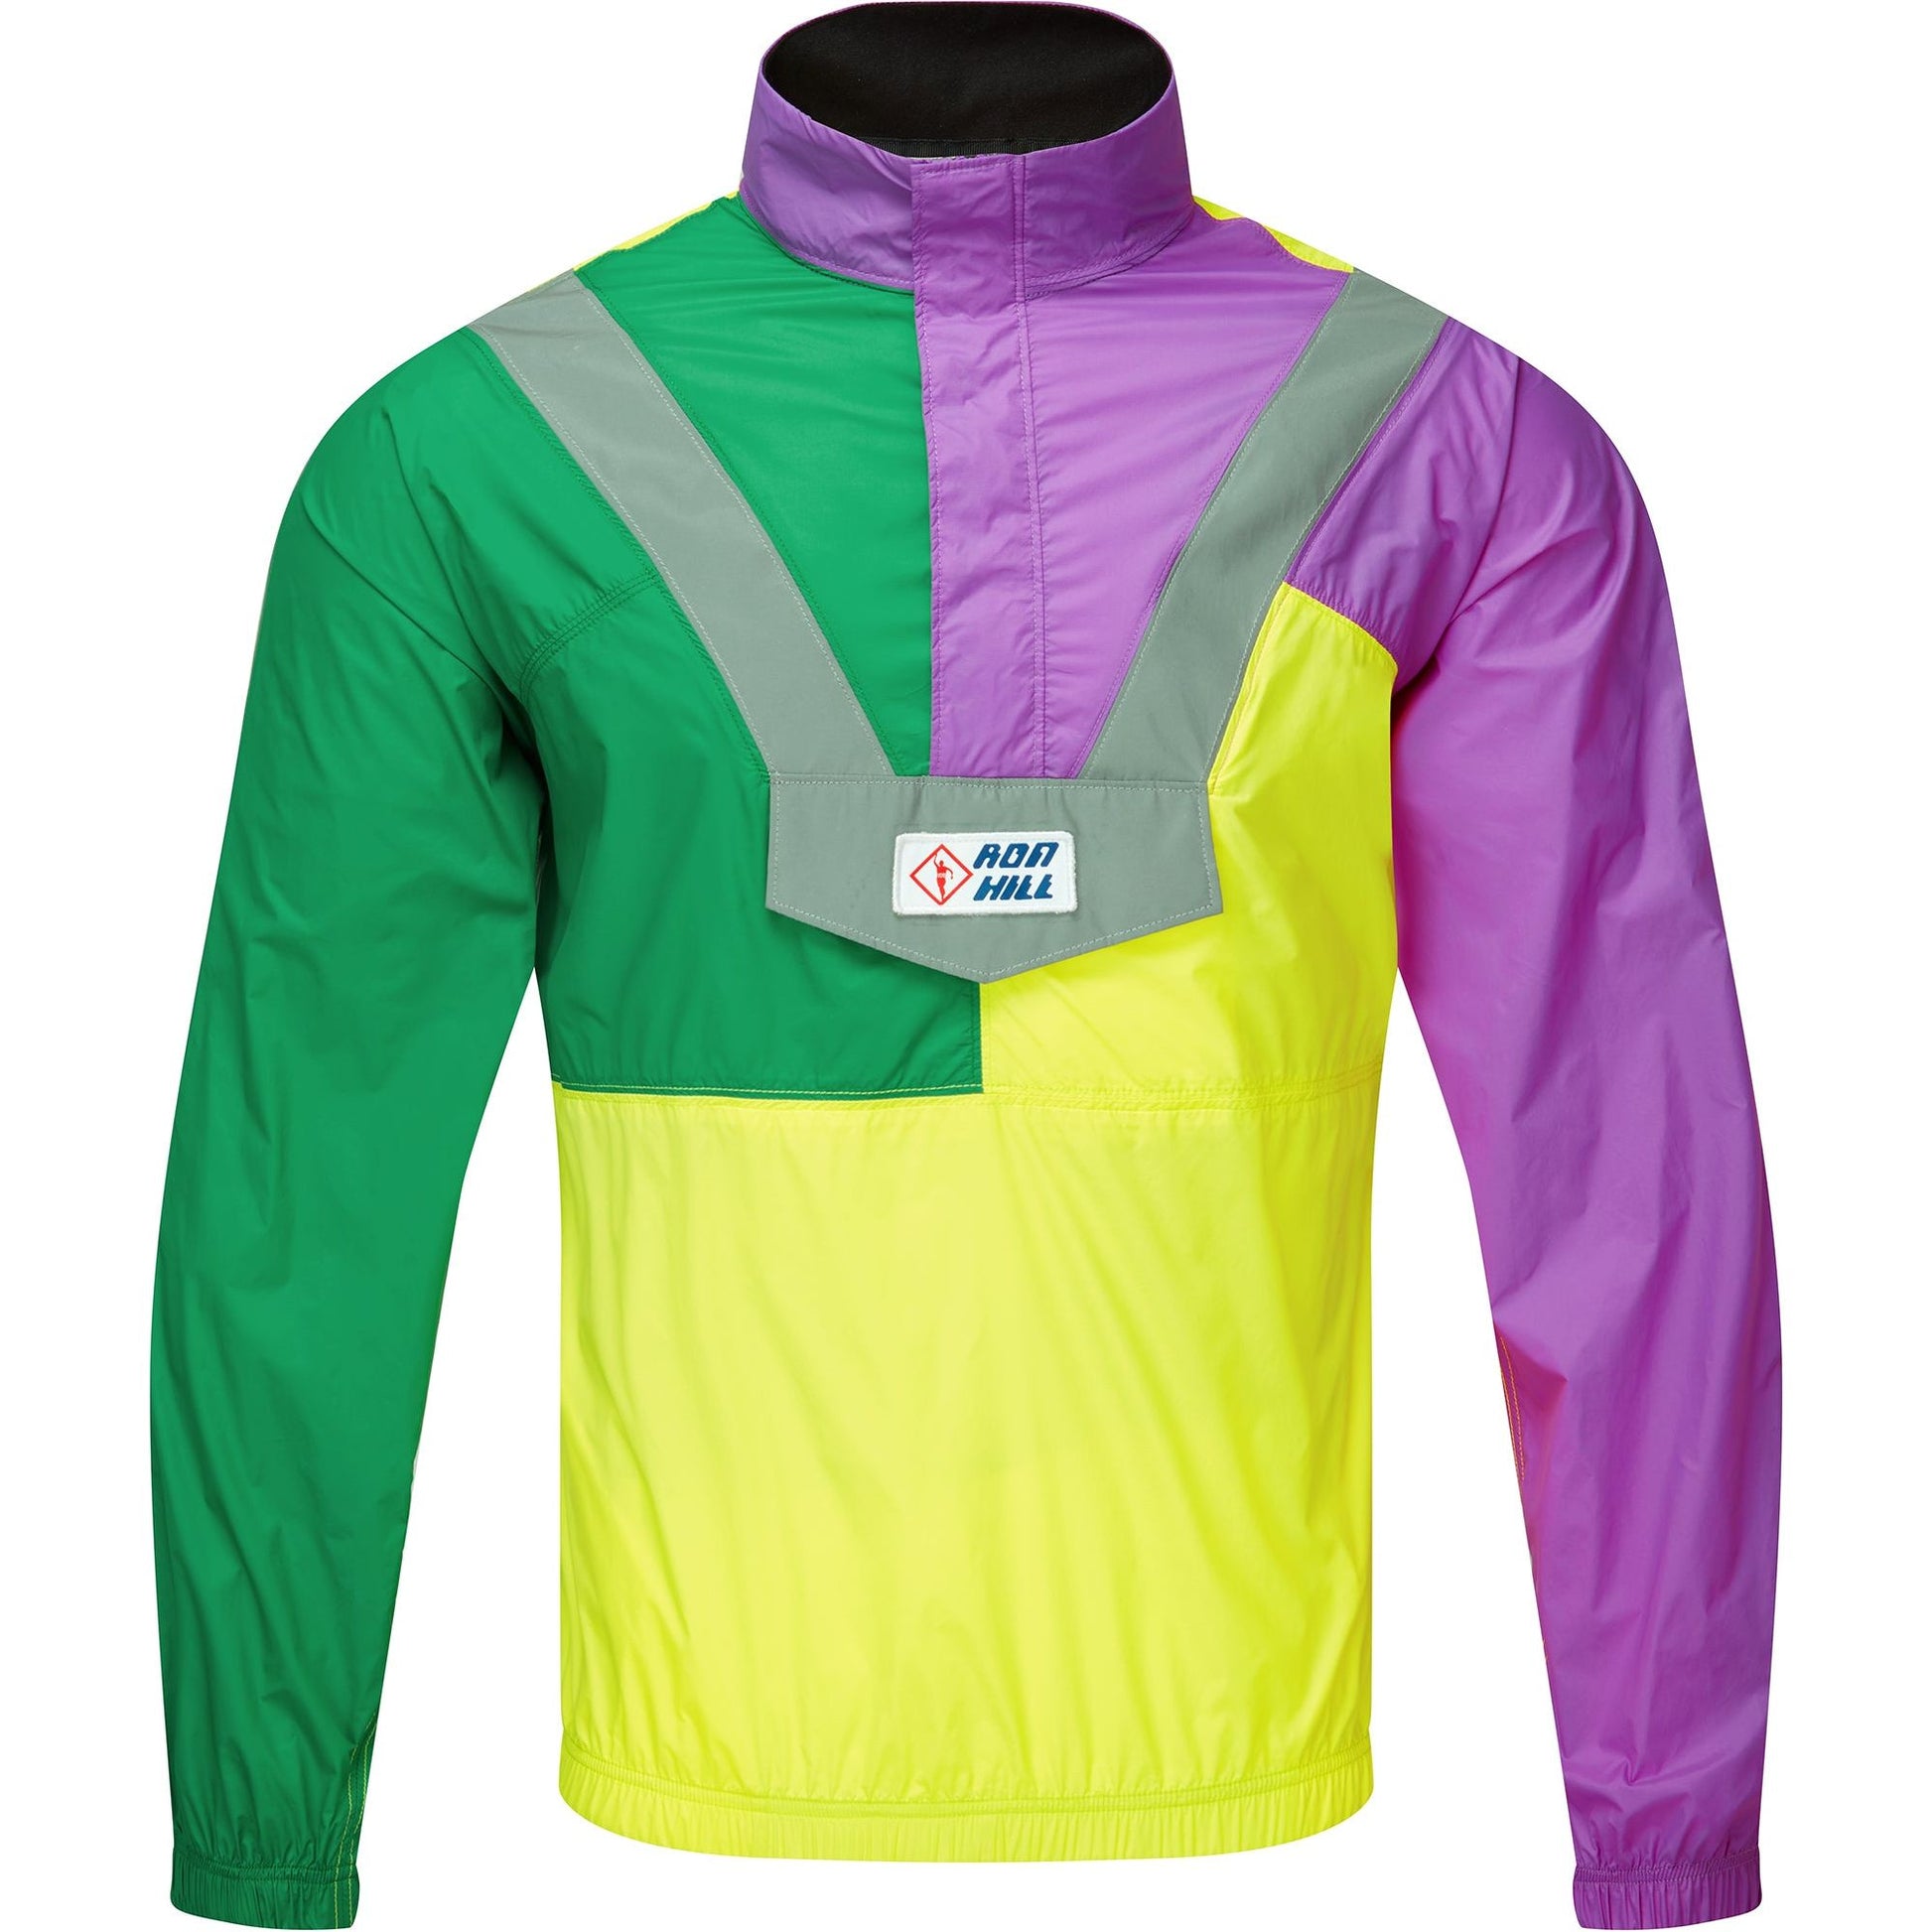 Ronhill Tech Flash Jacket Front - Front View